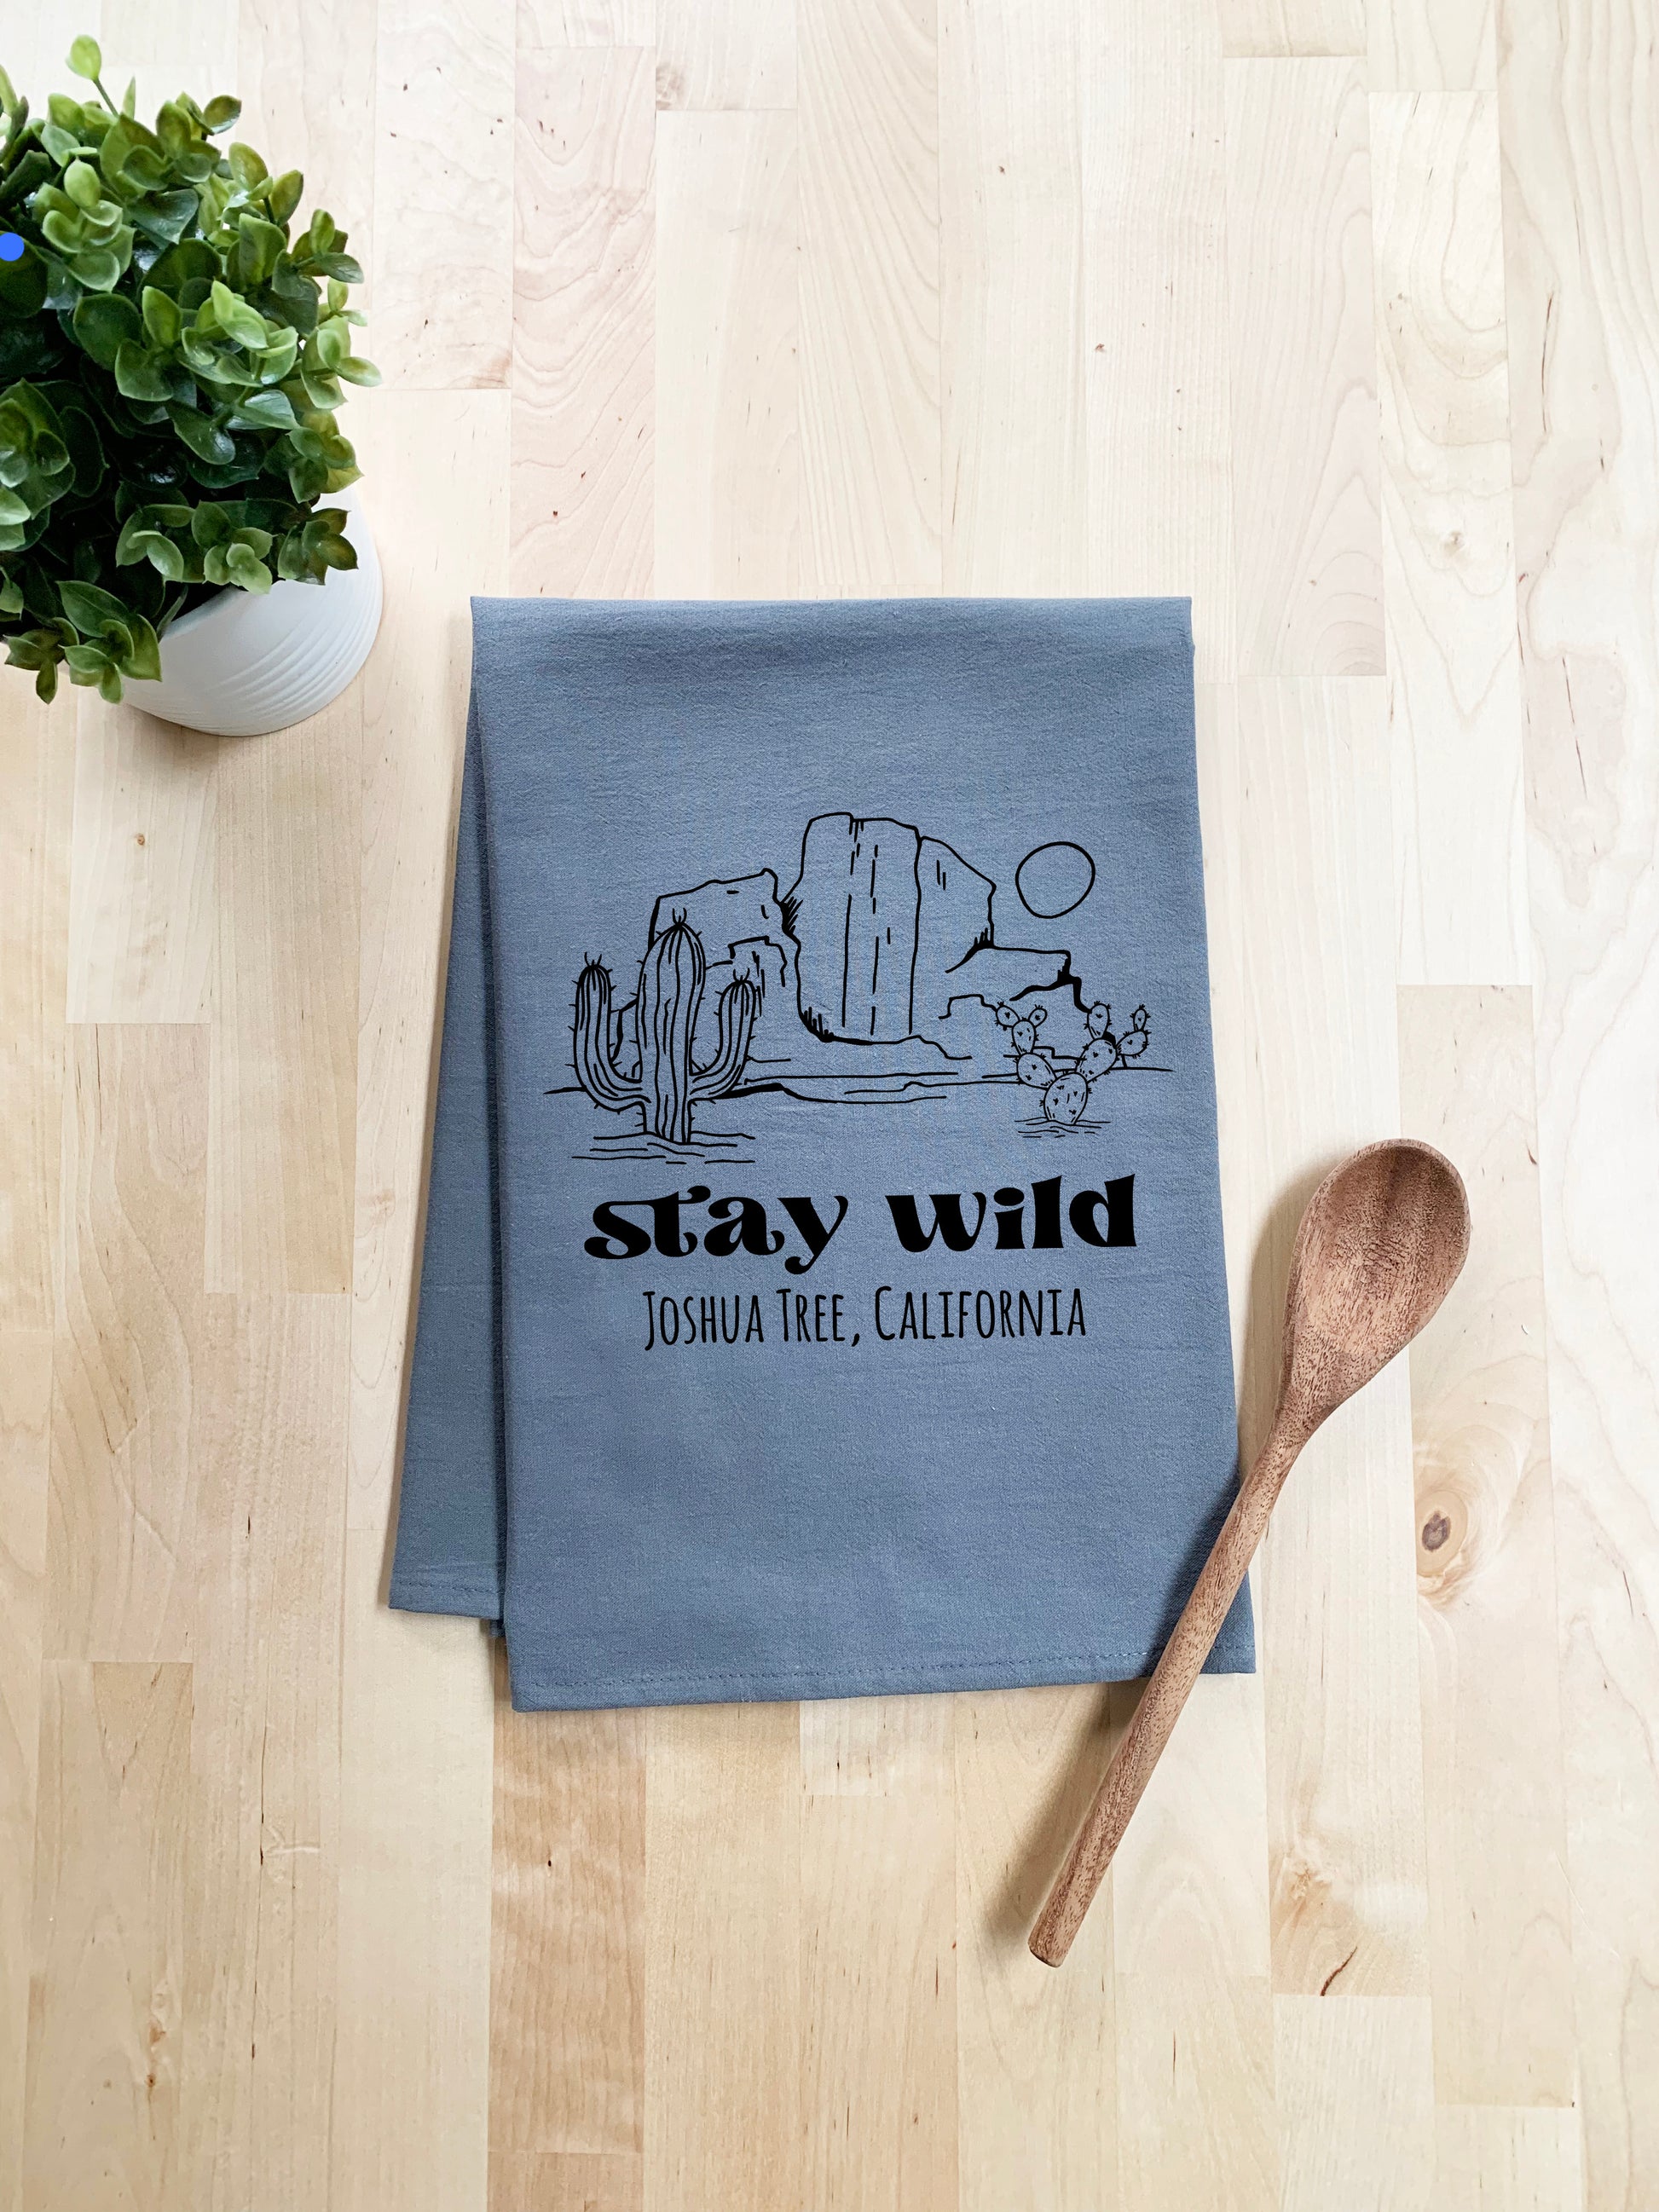 a tea towel that says stay wild on it